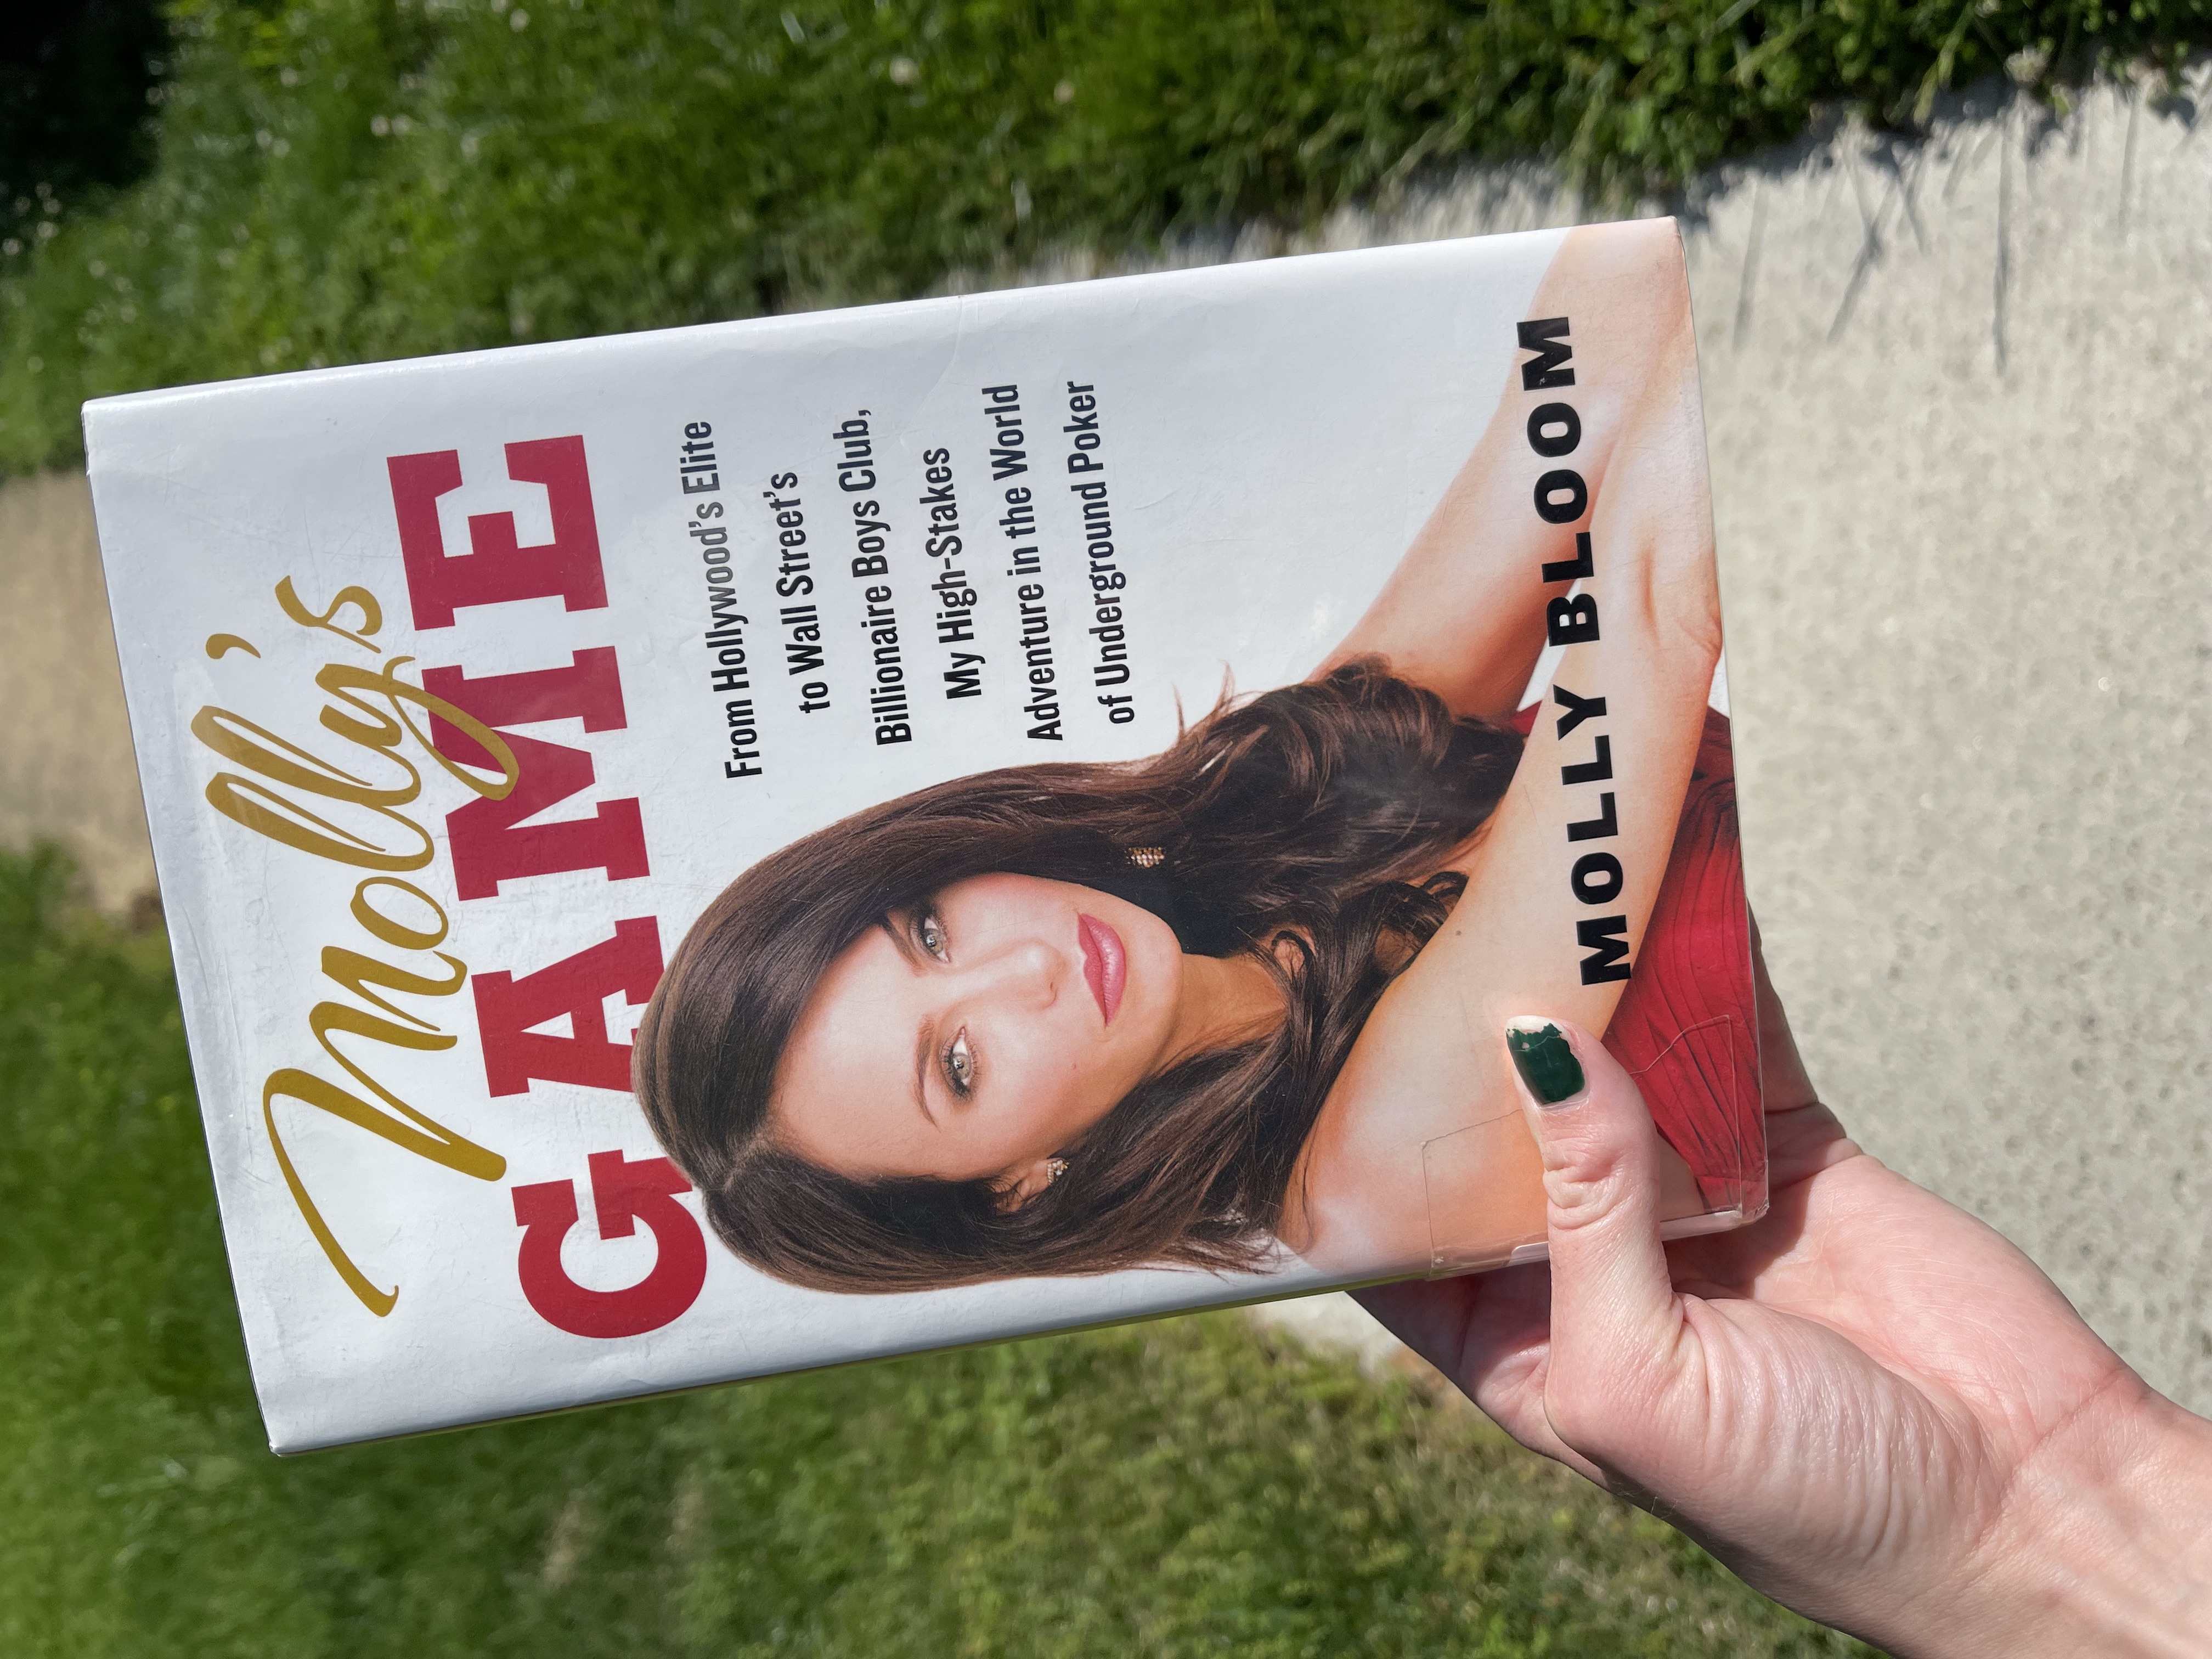 Molly's Game vs. The True Story of Molly Bloom